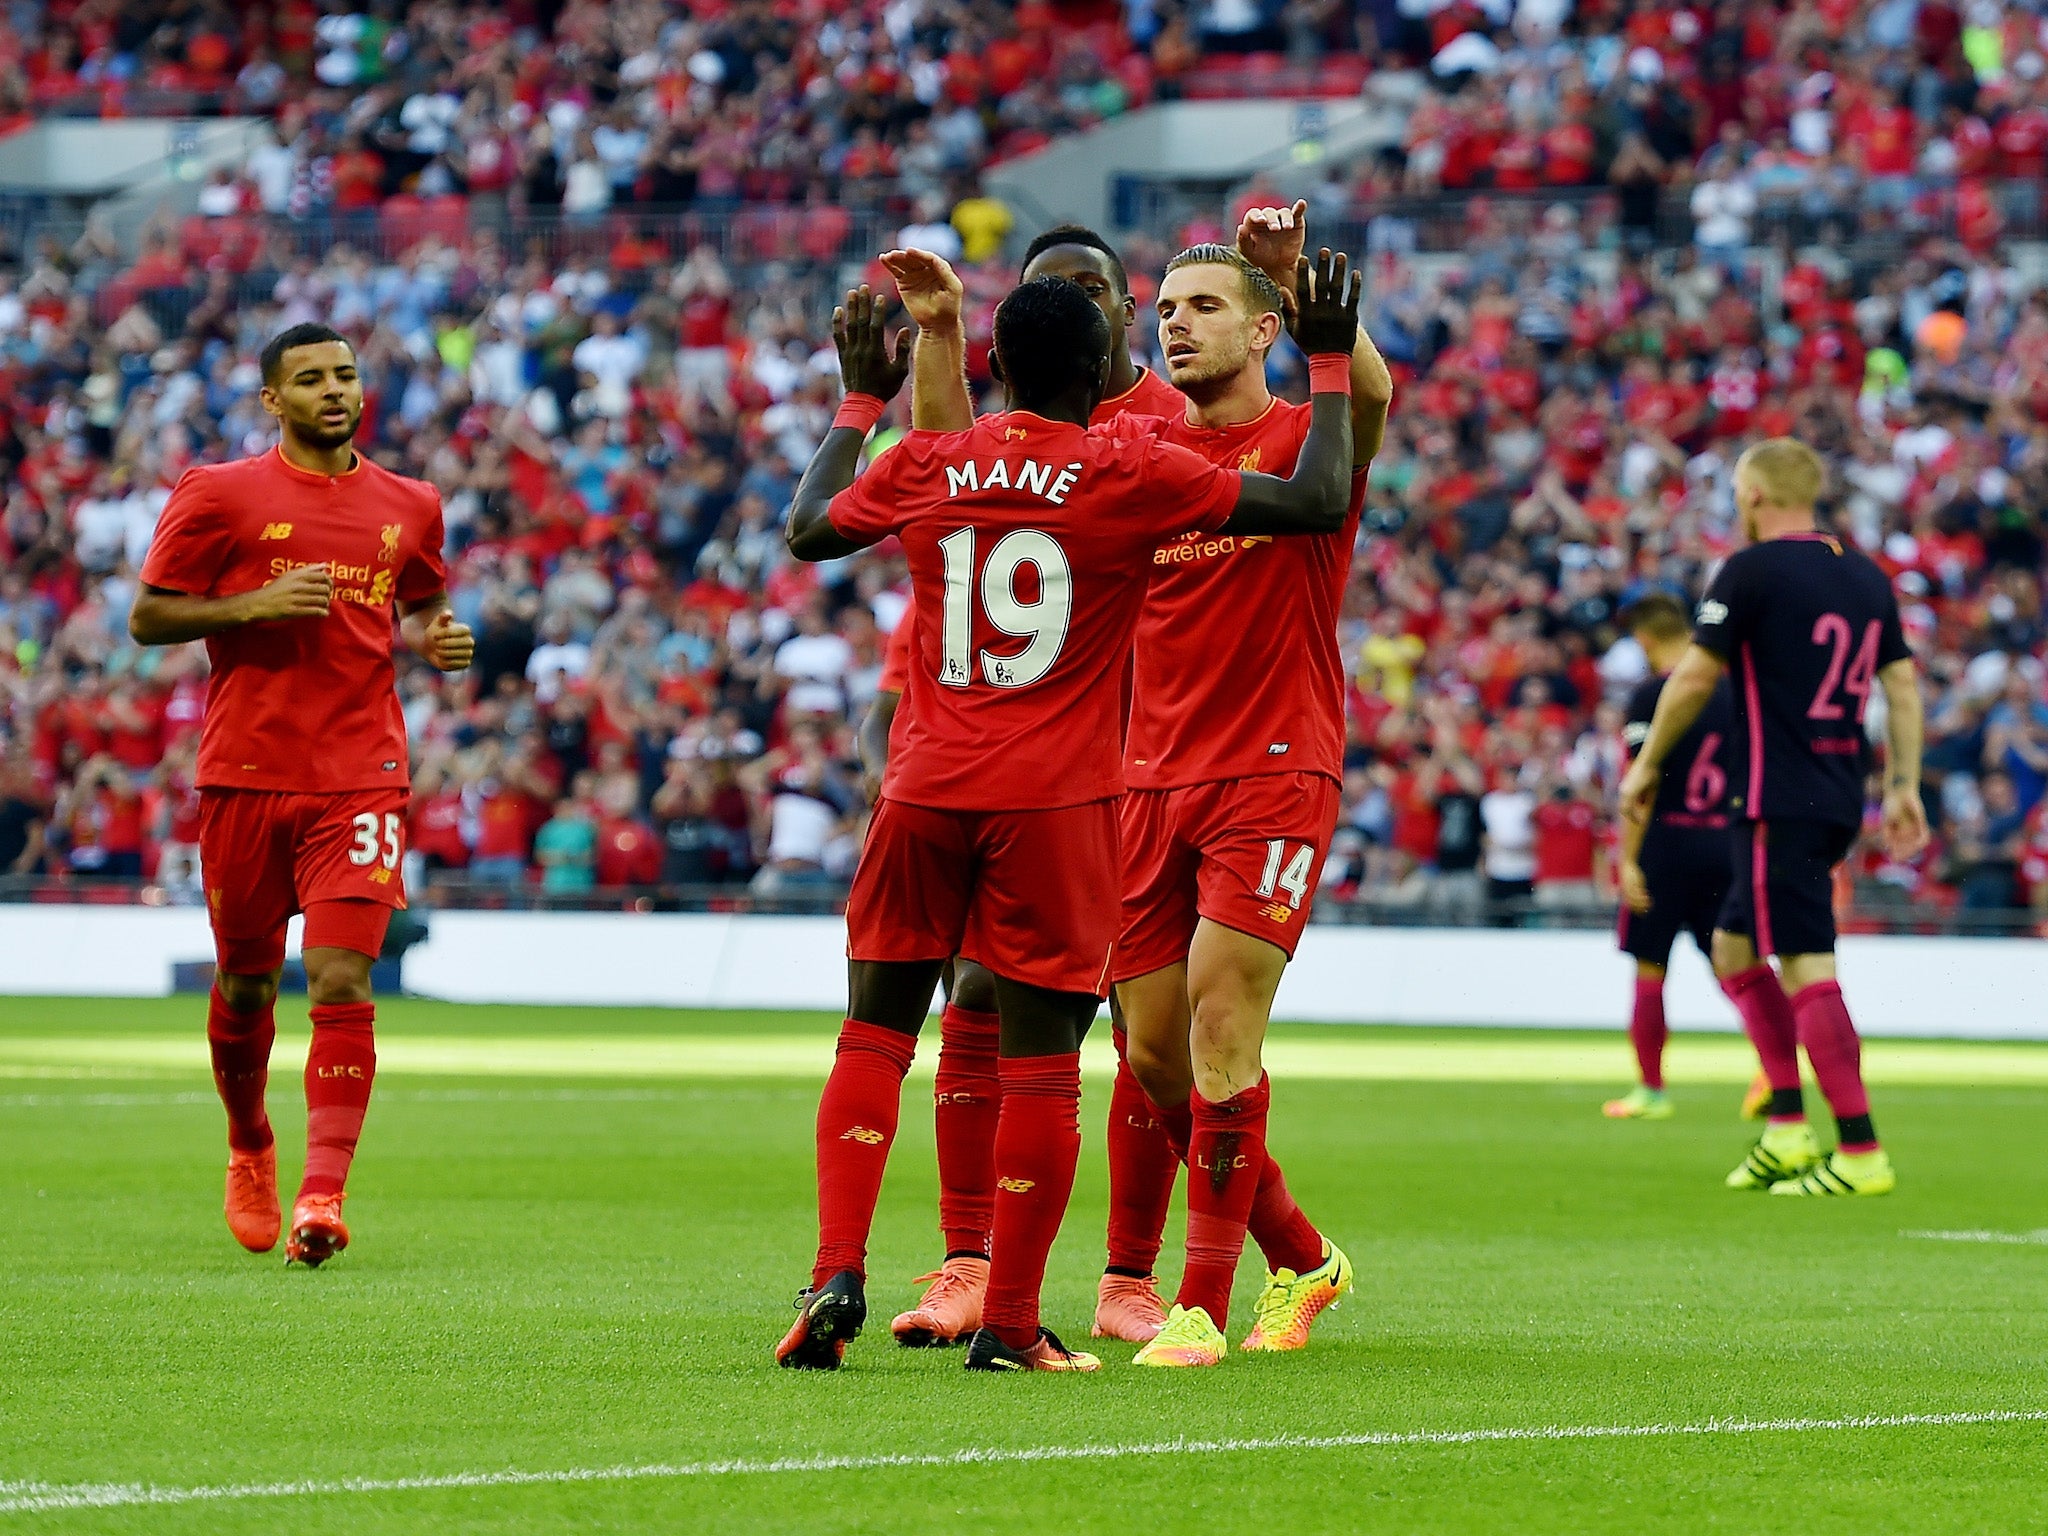 Liverpool vs Barcelona match report: Reds enjoy Wembley rout as Sadio Mane outshines ...2048 x 1536